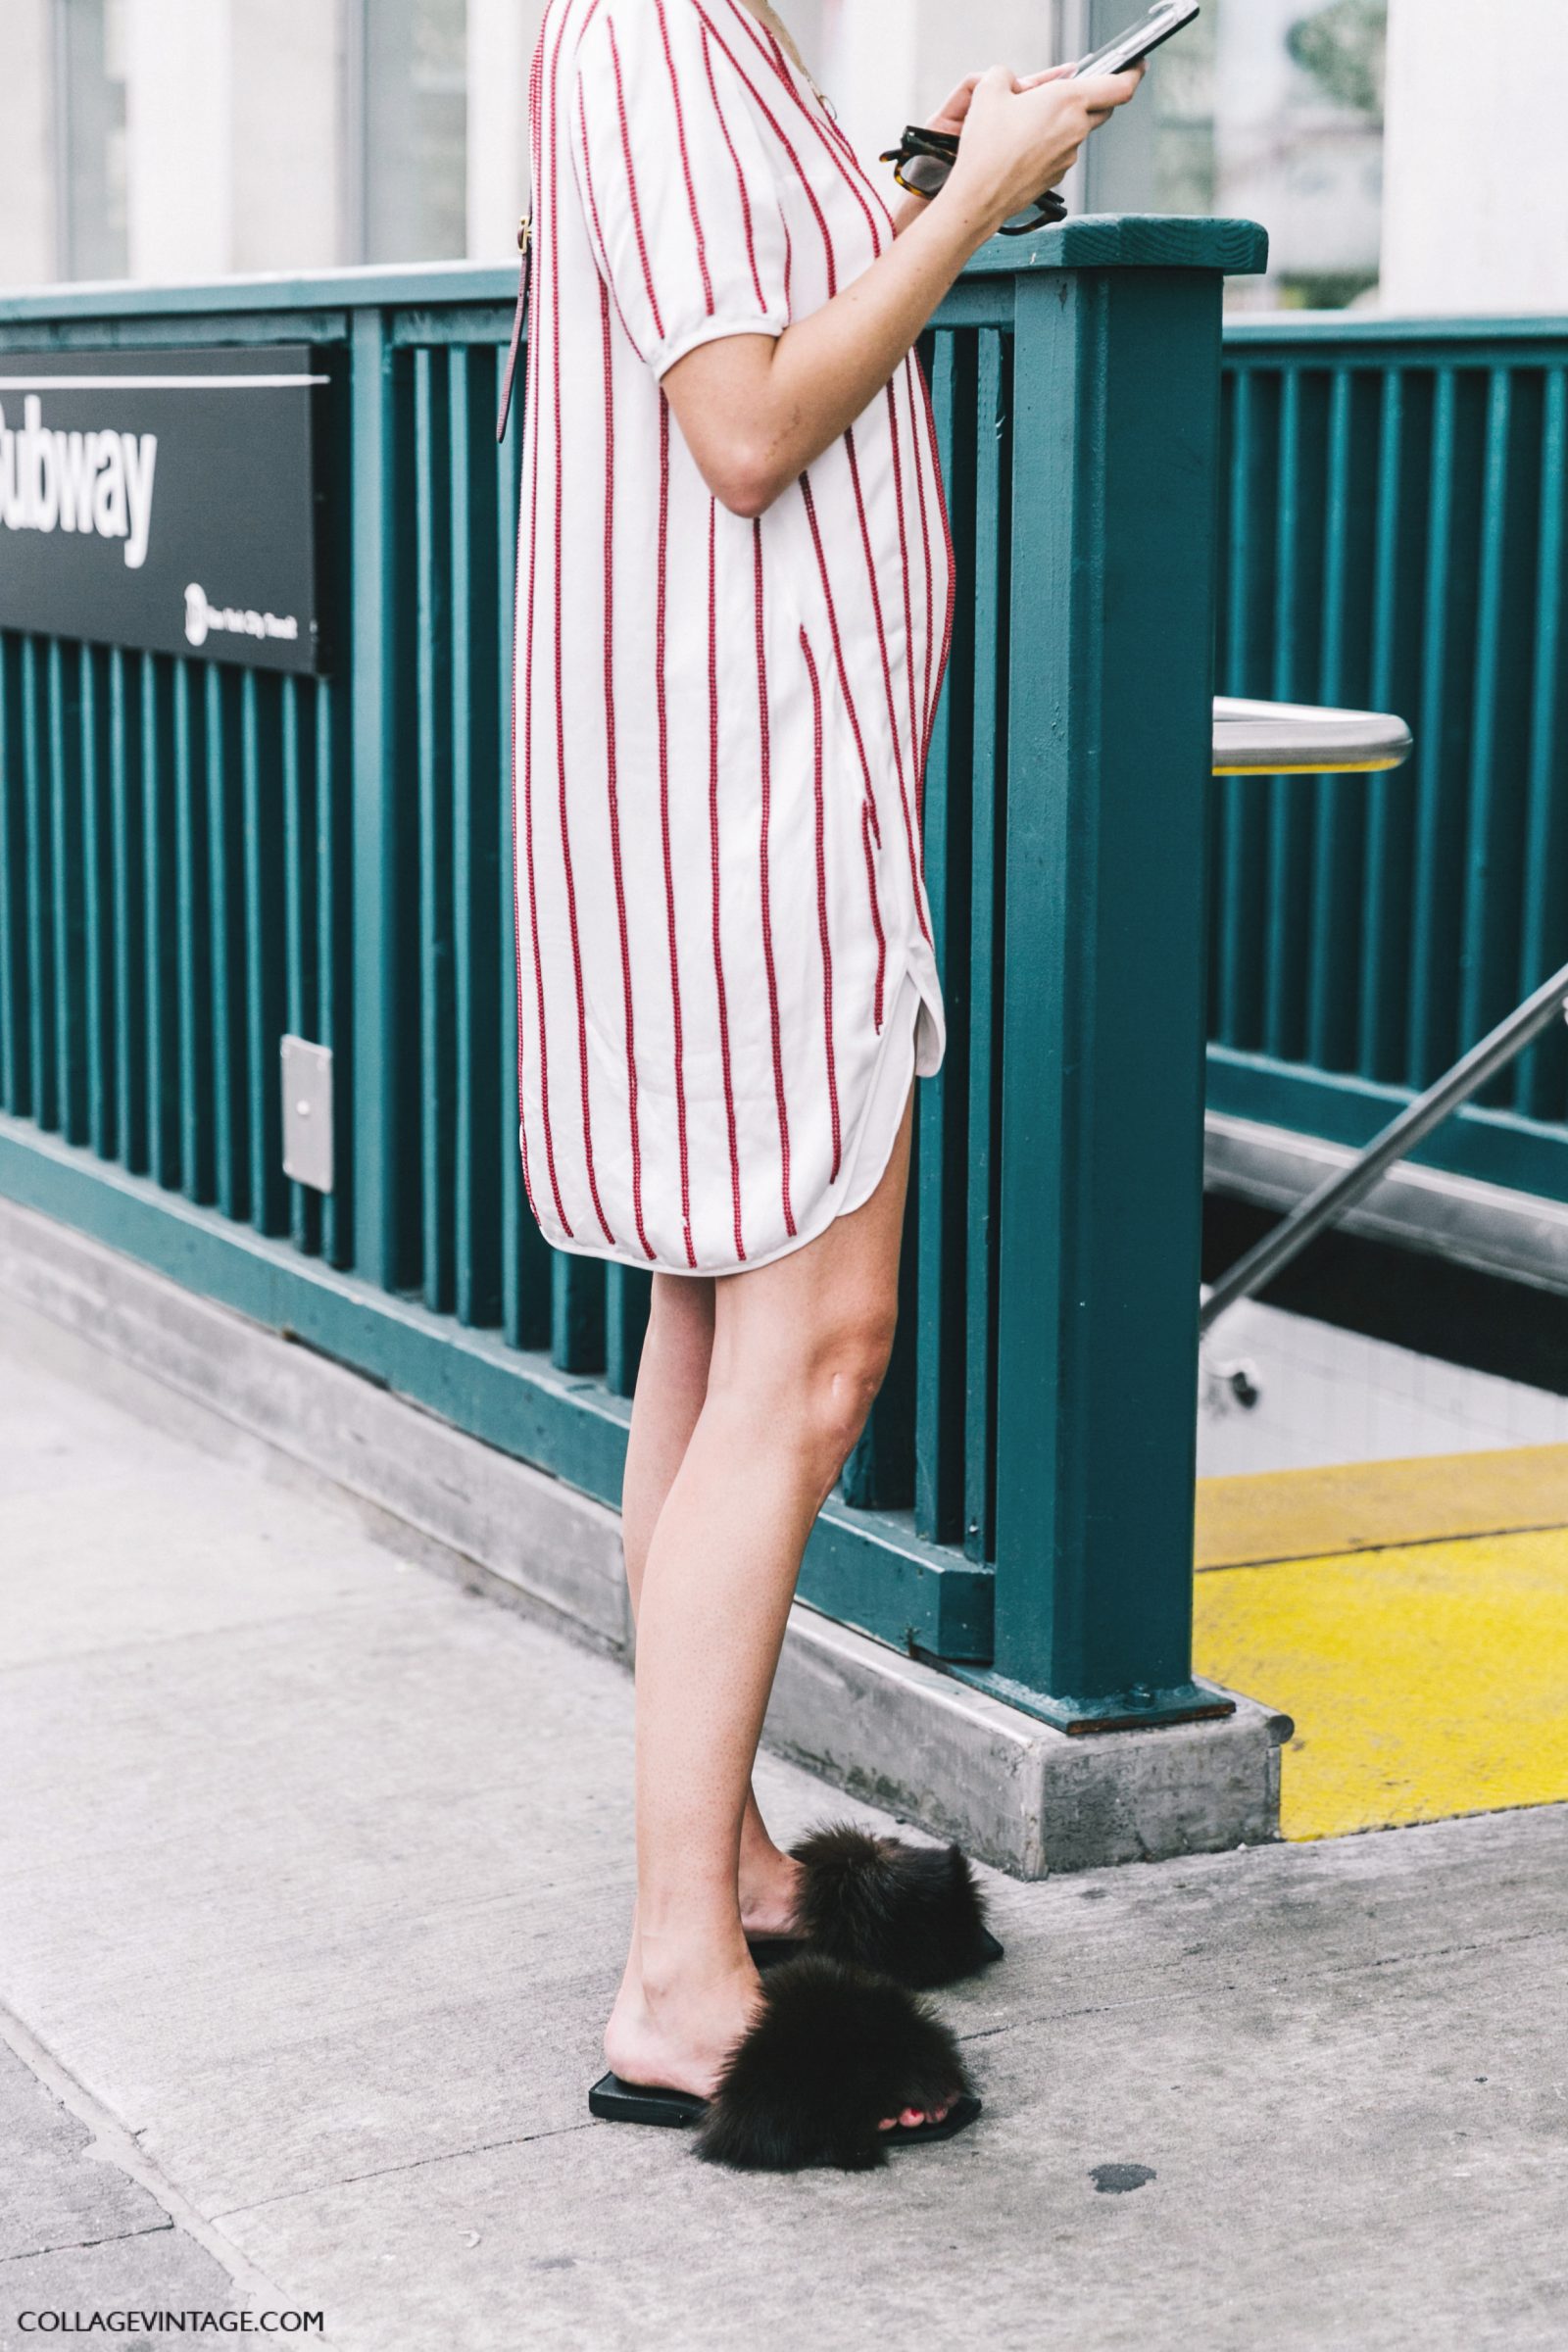 nyfw-new_york_fashion_week_ss17-street_style-outfits-collage_vintage-julia_gall_stripped_dress-furry_sandals-1